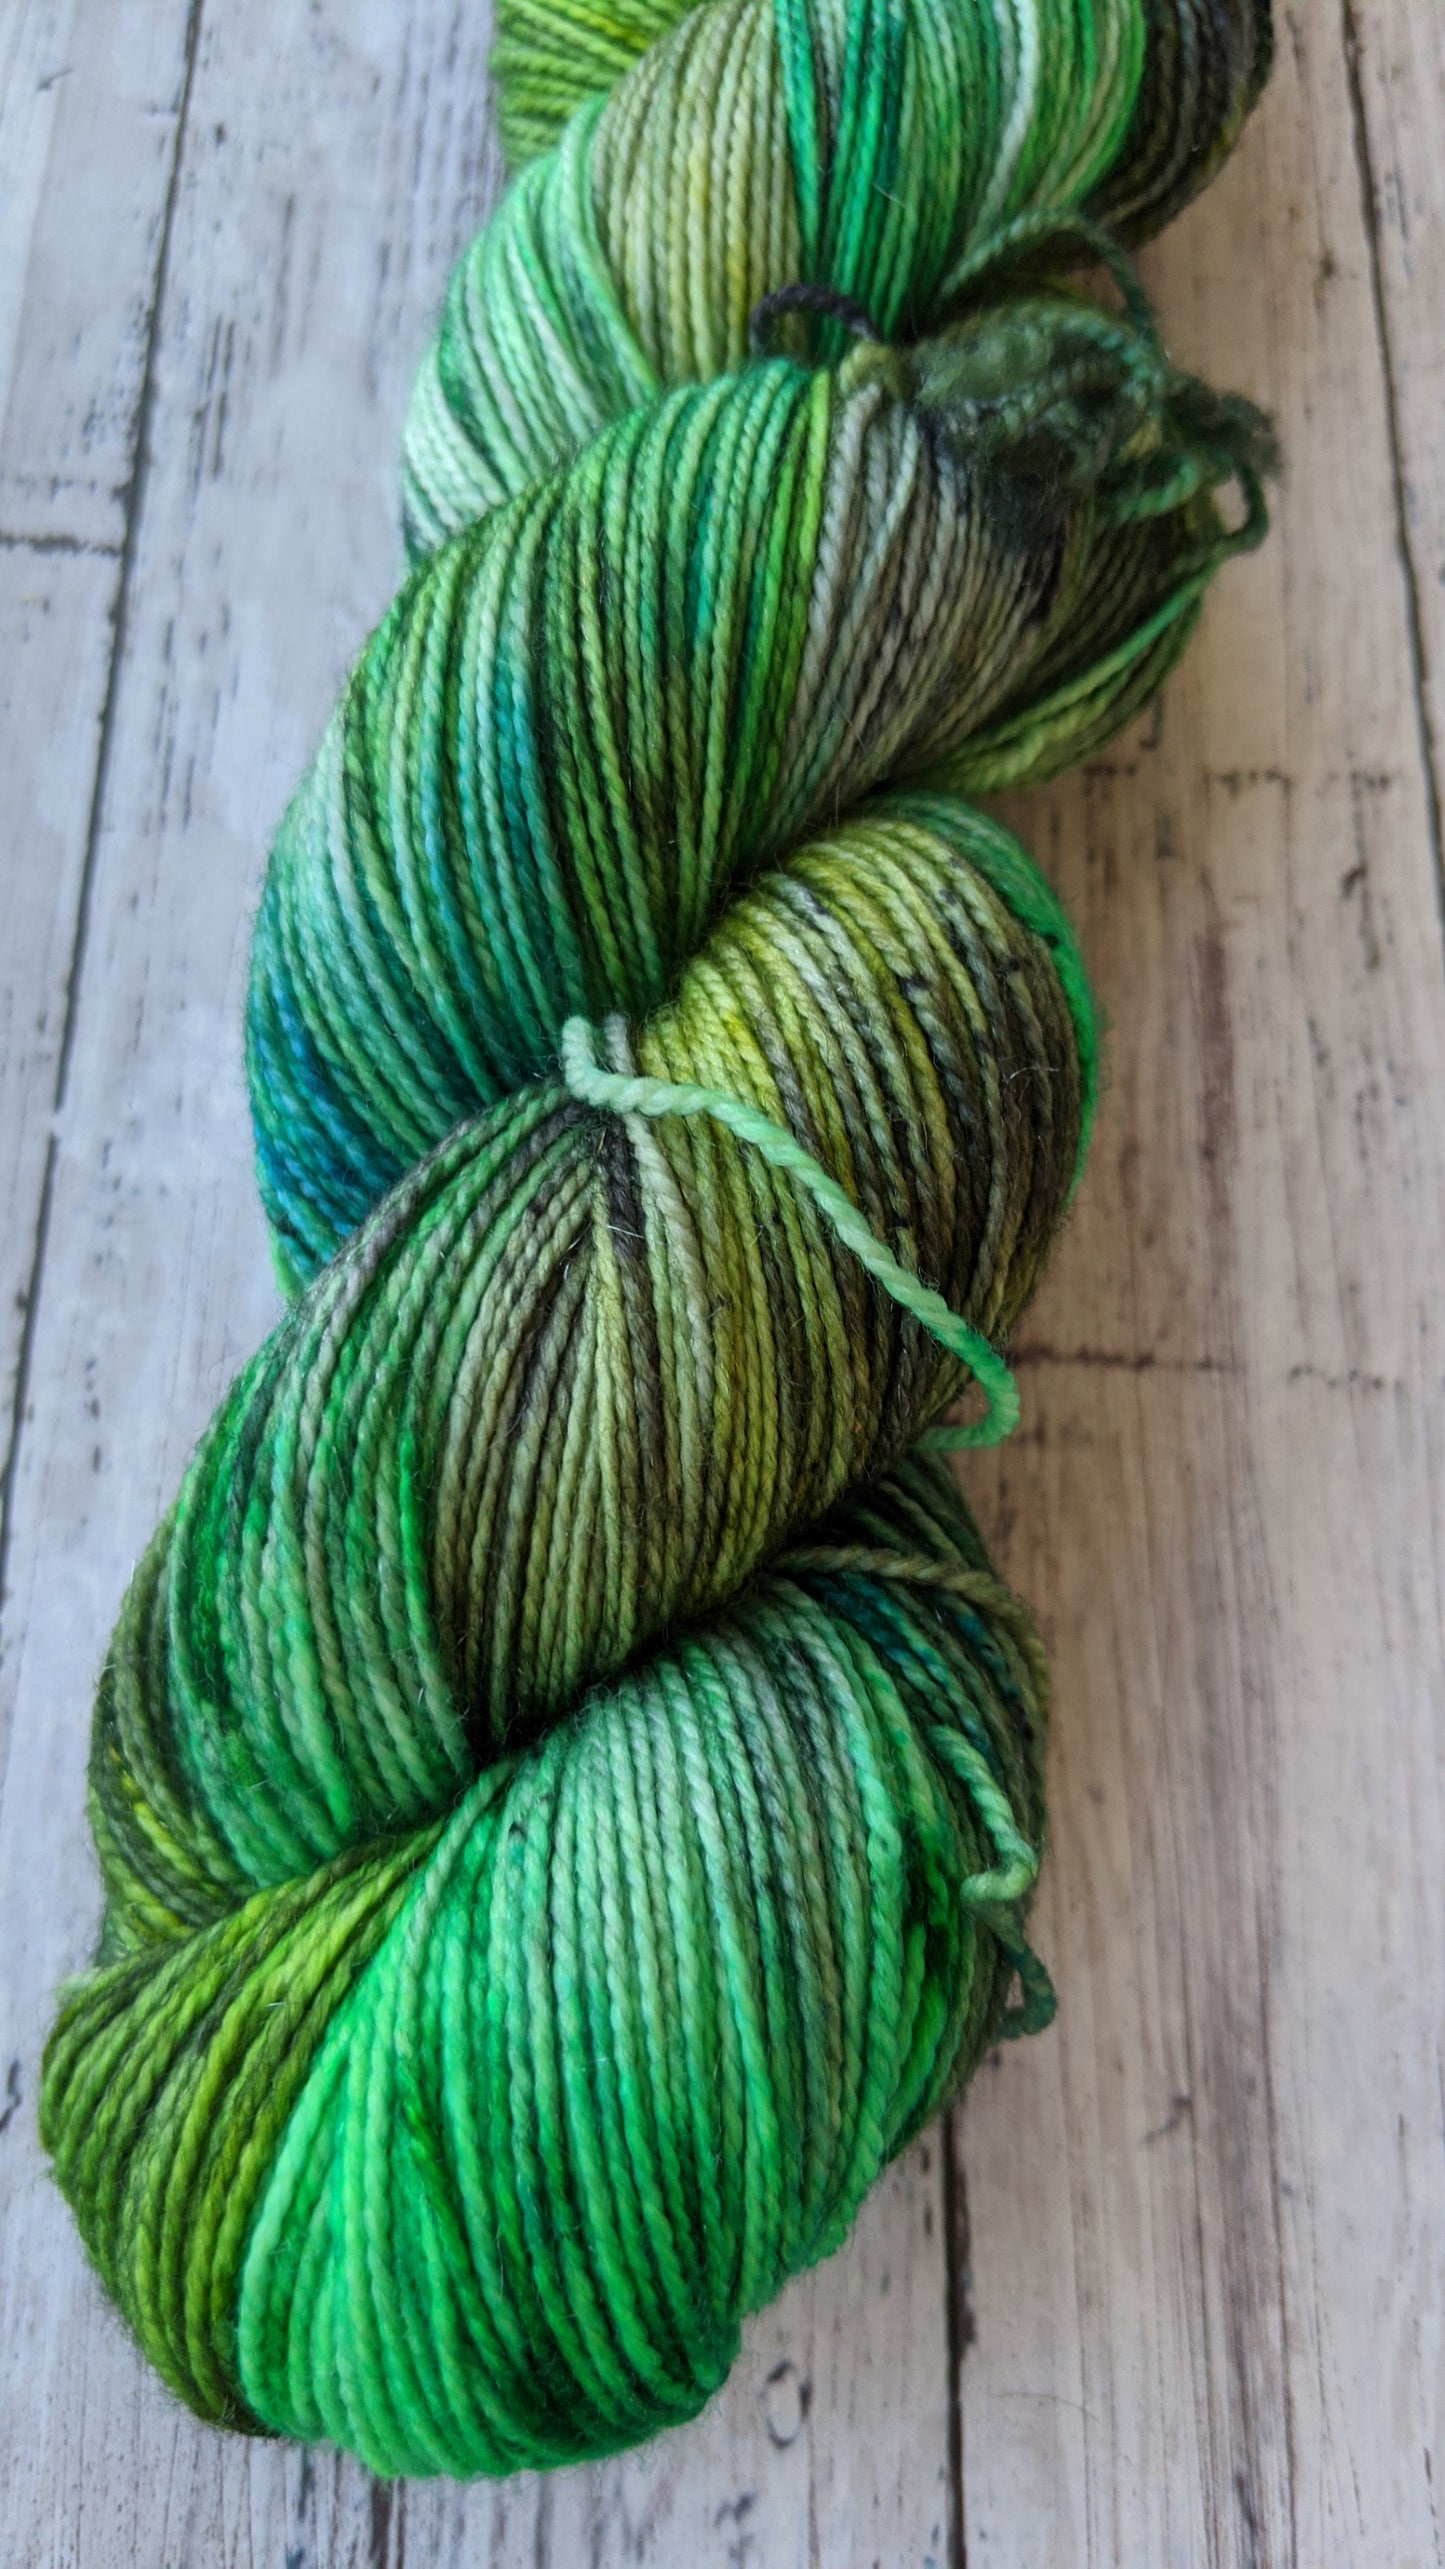 hand dyed various shades of green yarn with black speckles